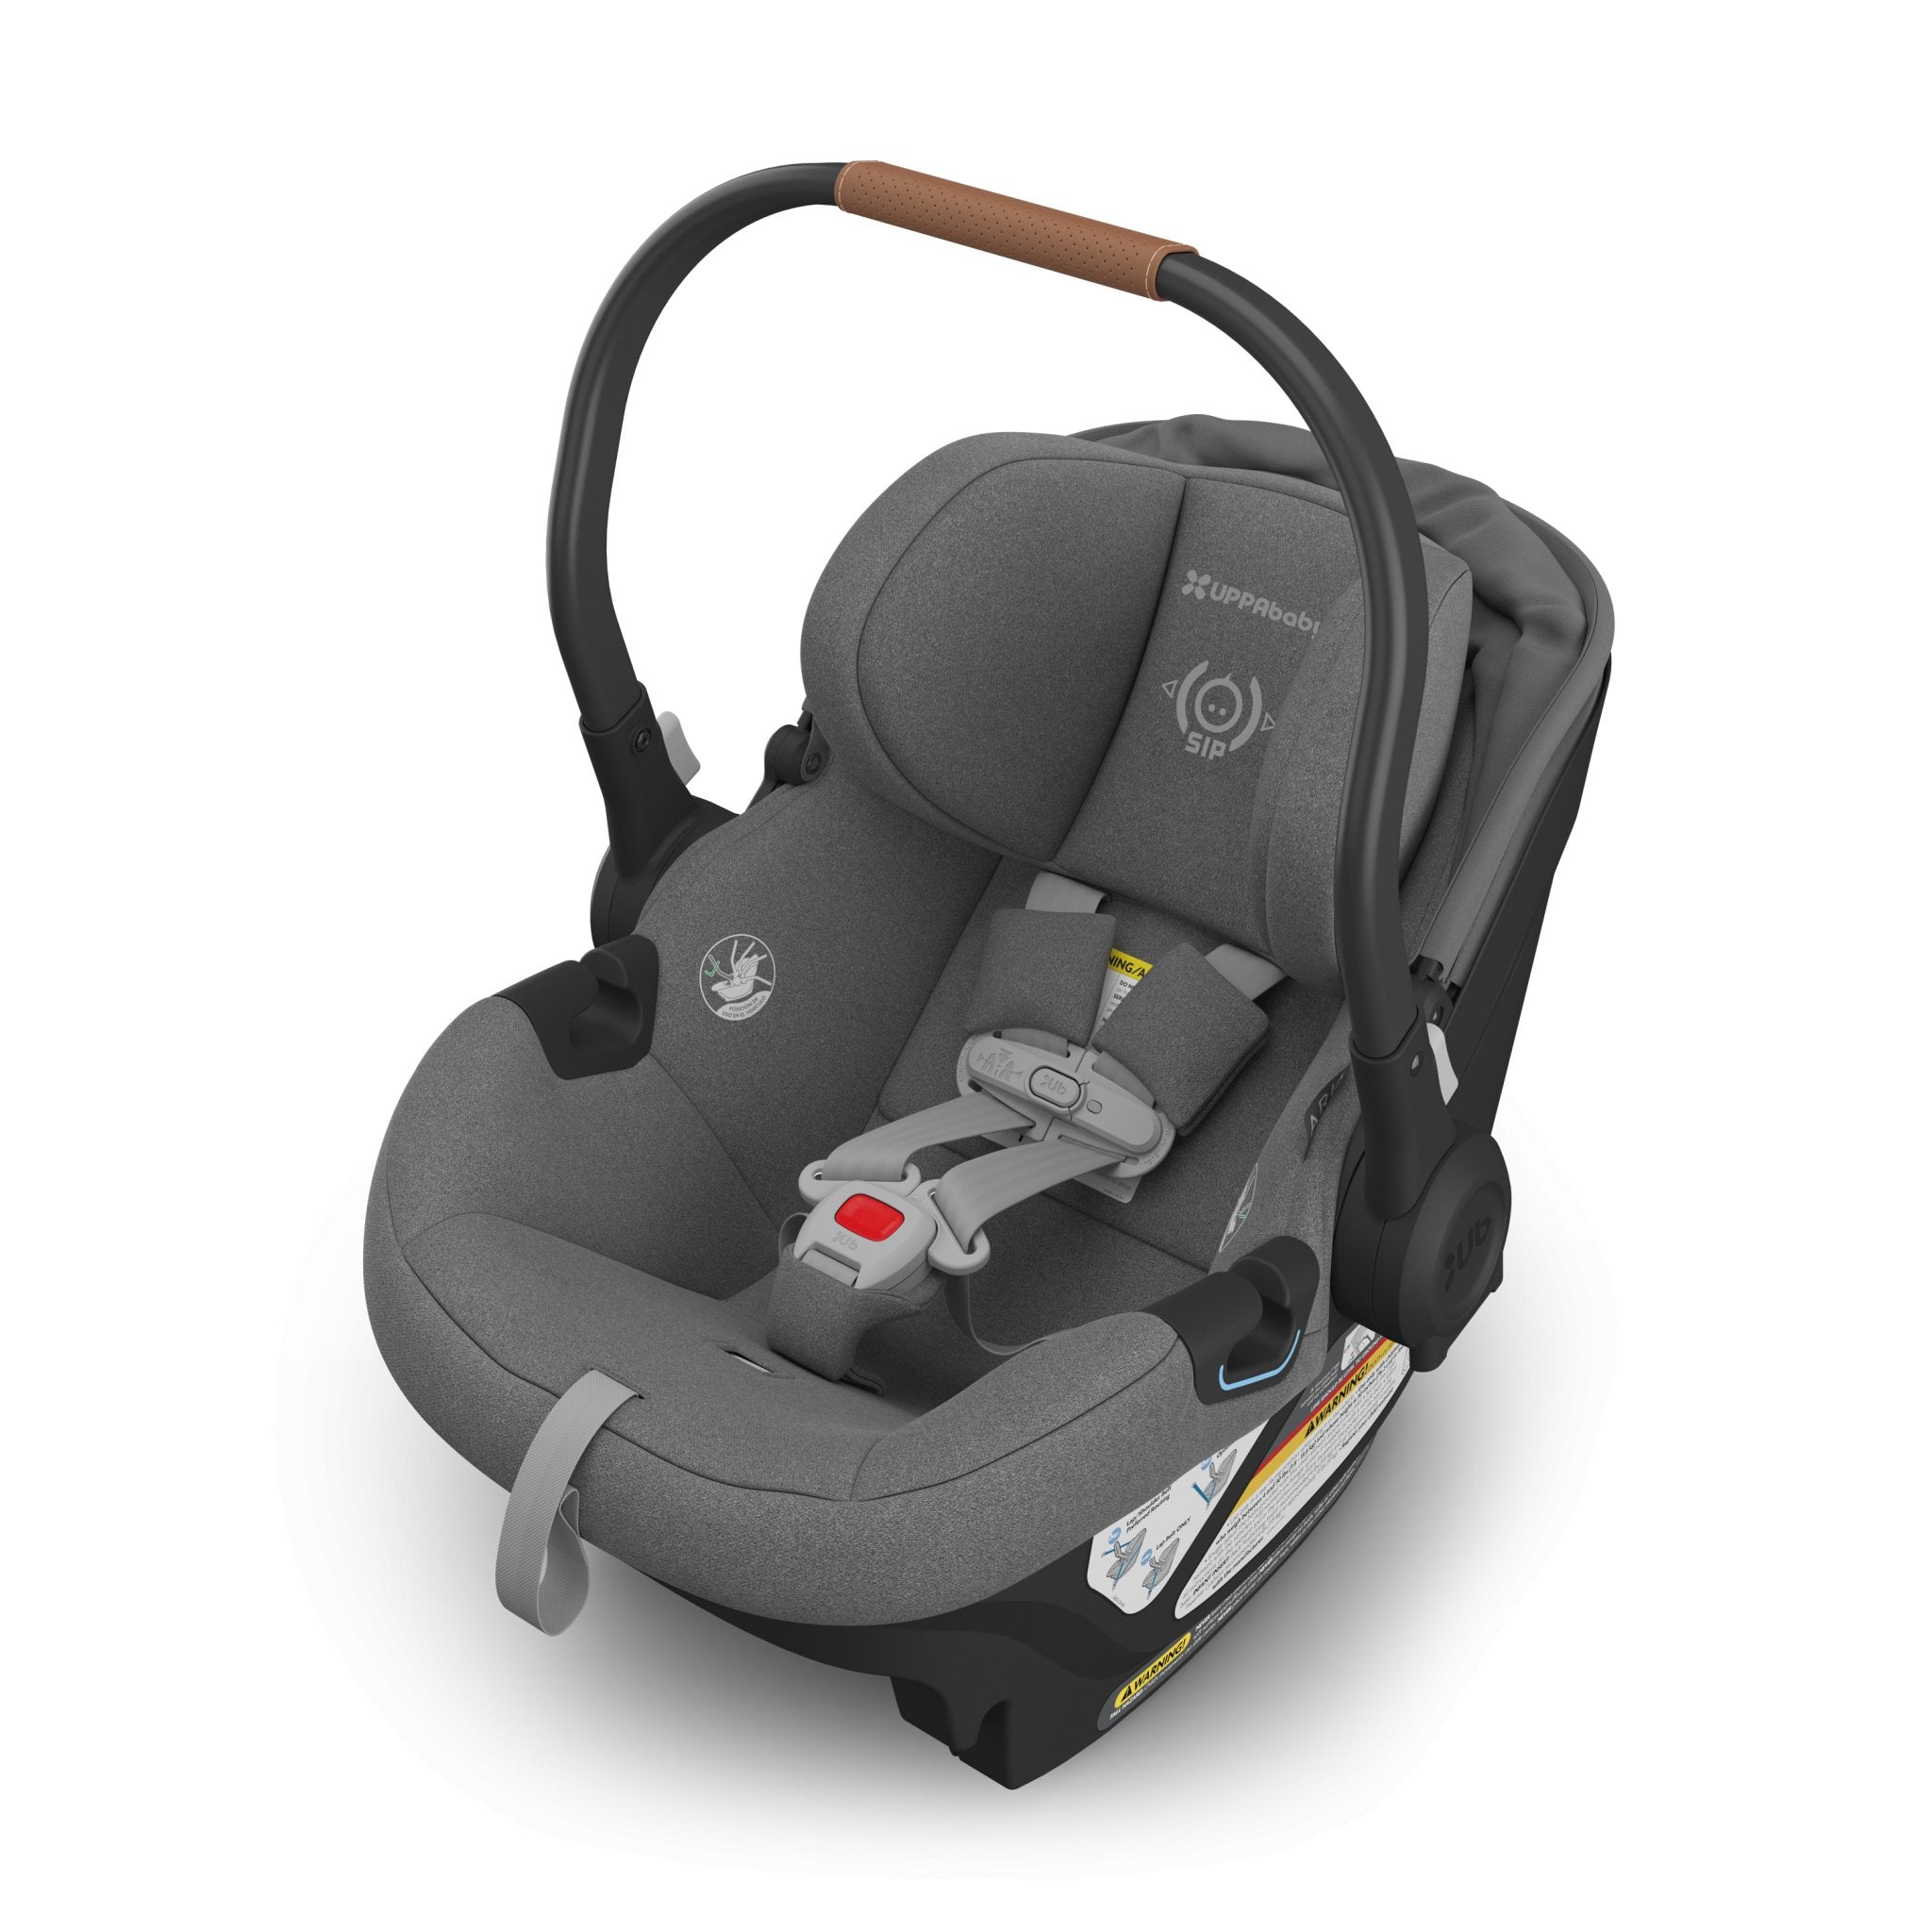 UPPAbaby ARIA Infant Car Seat - ANB Baby -810129596656$300 - $500